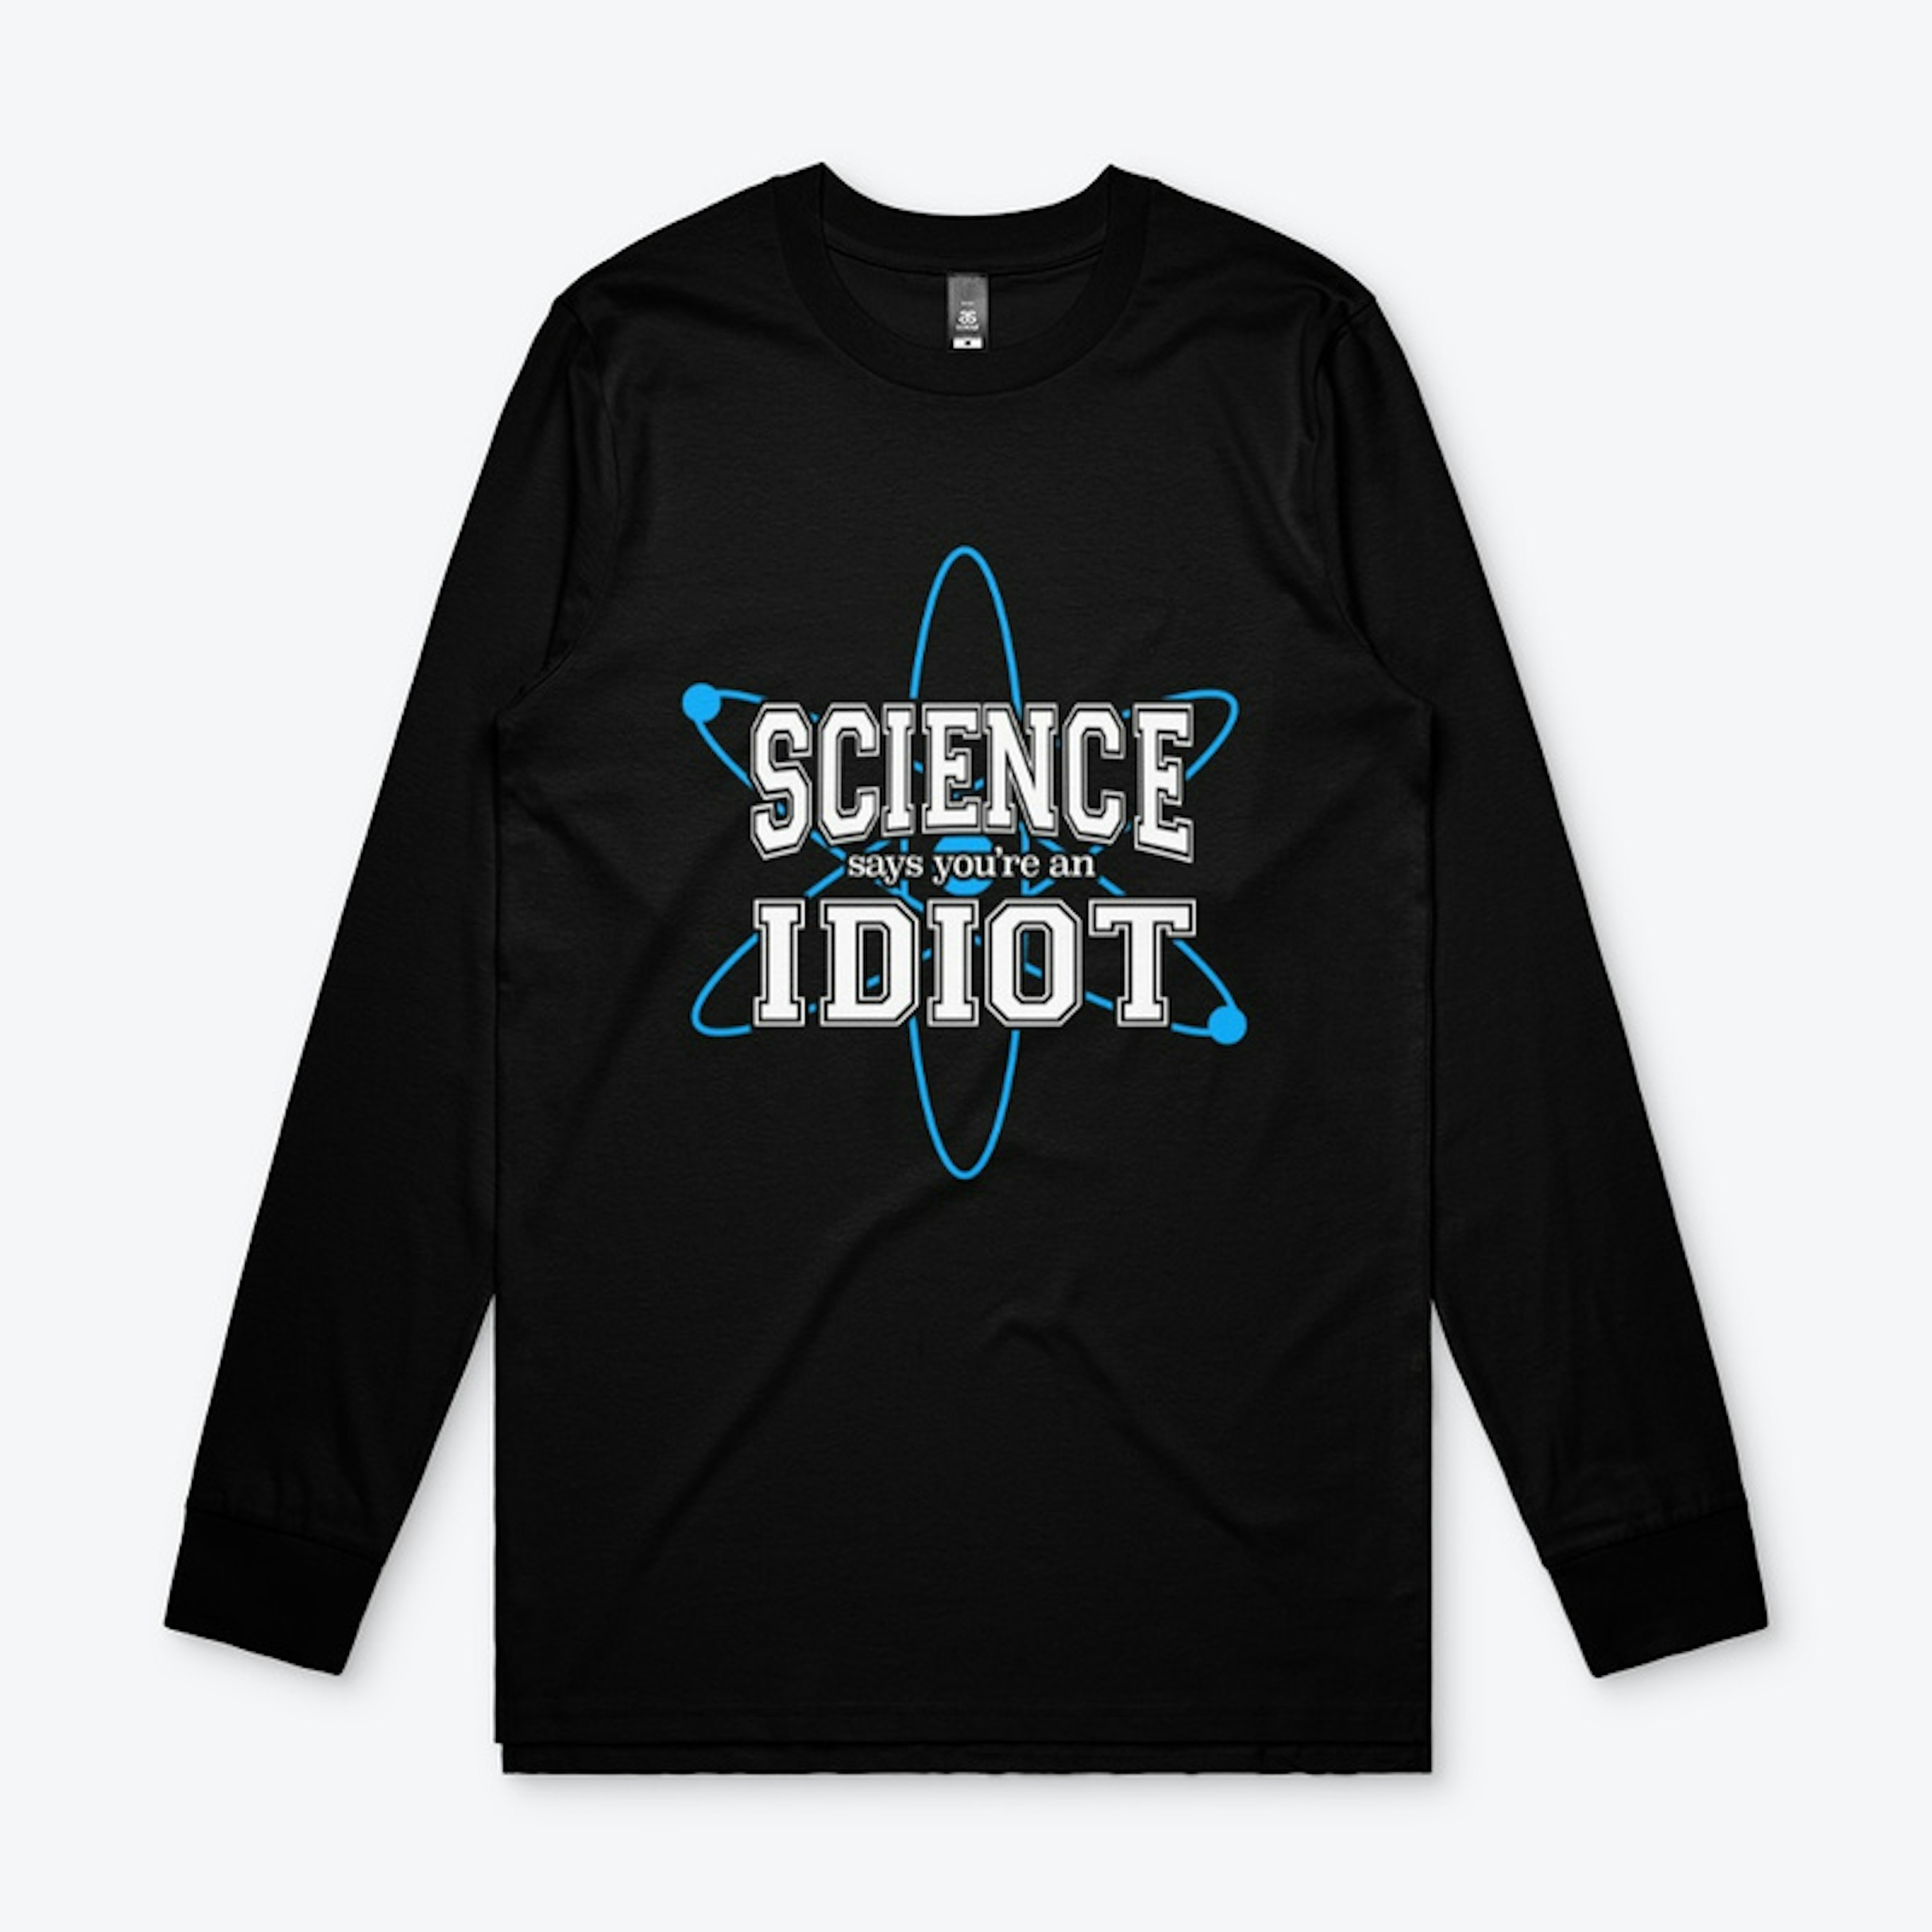 Science Says You're an Idiot!